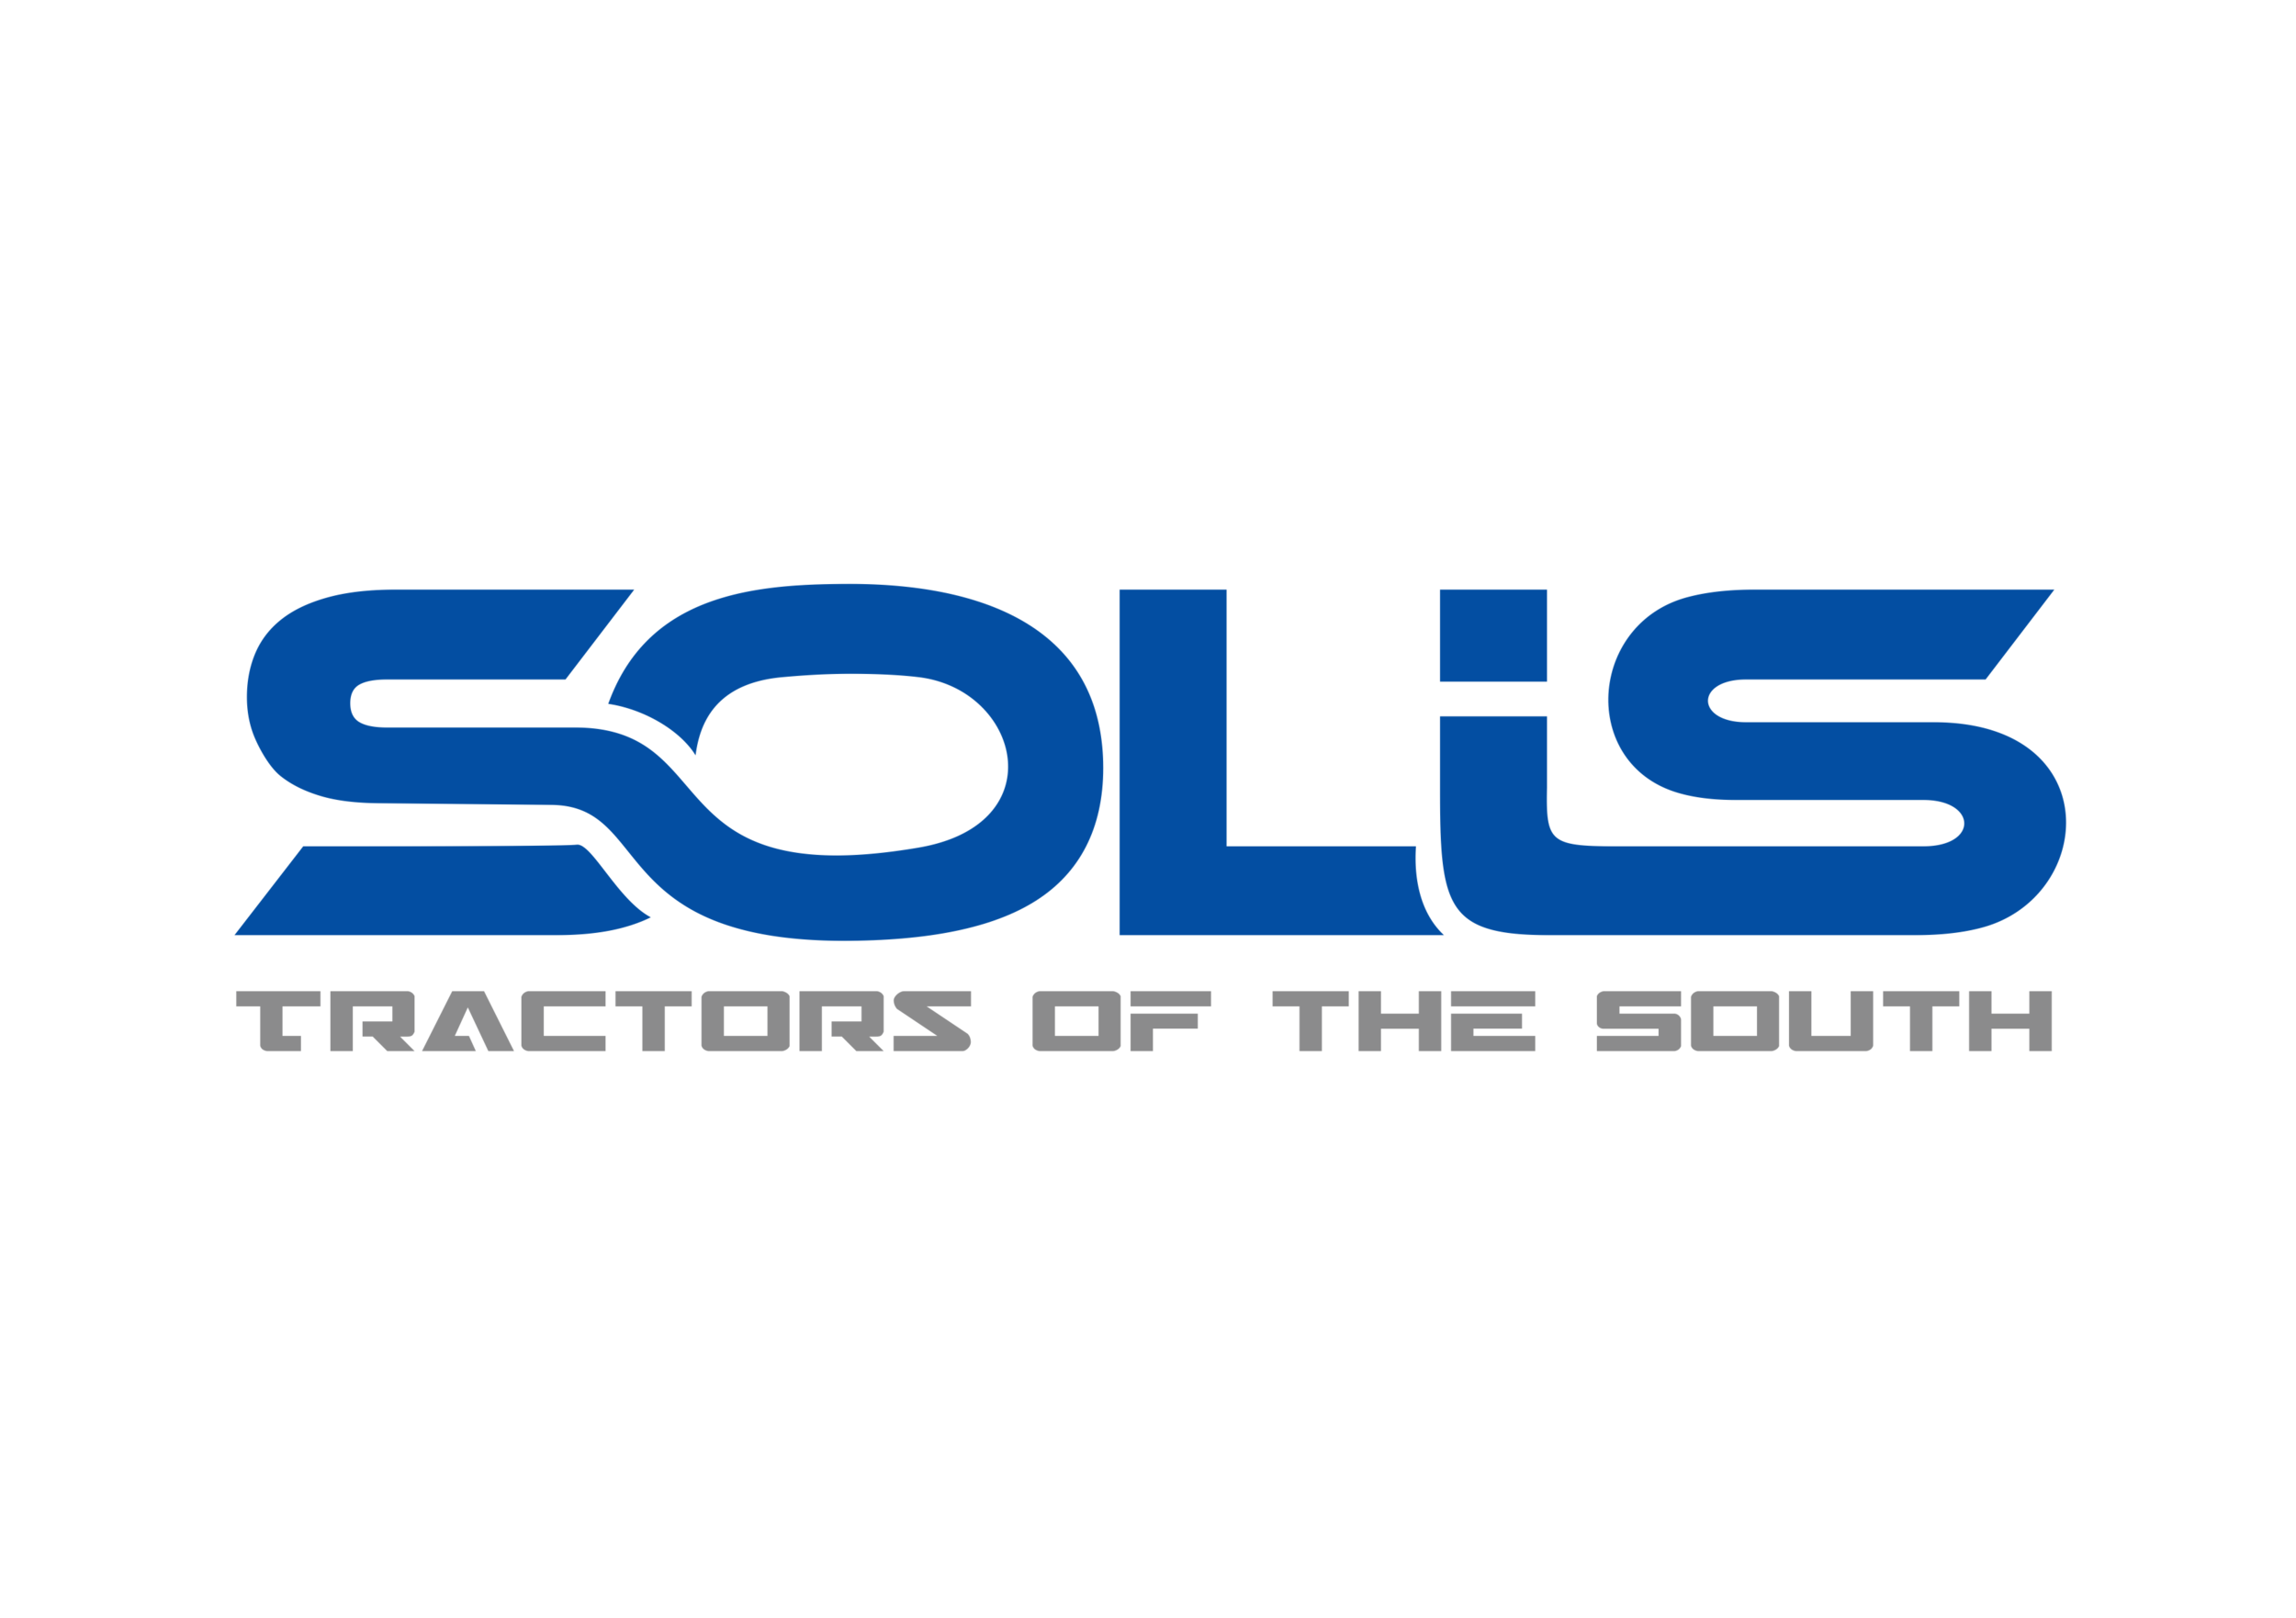 Solis Tractors of the South